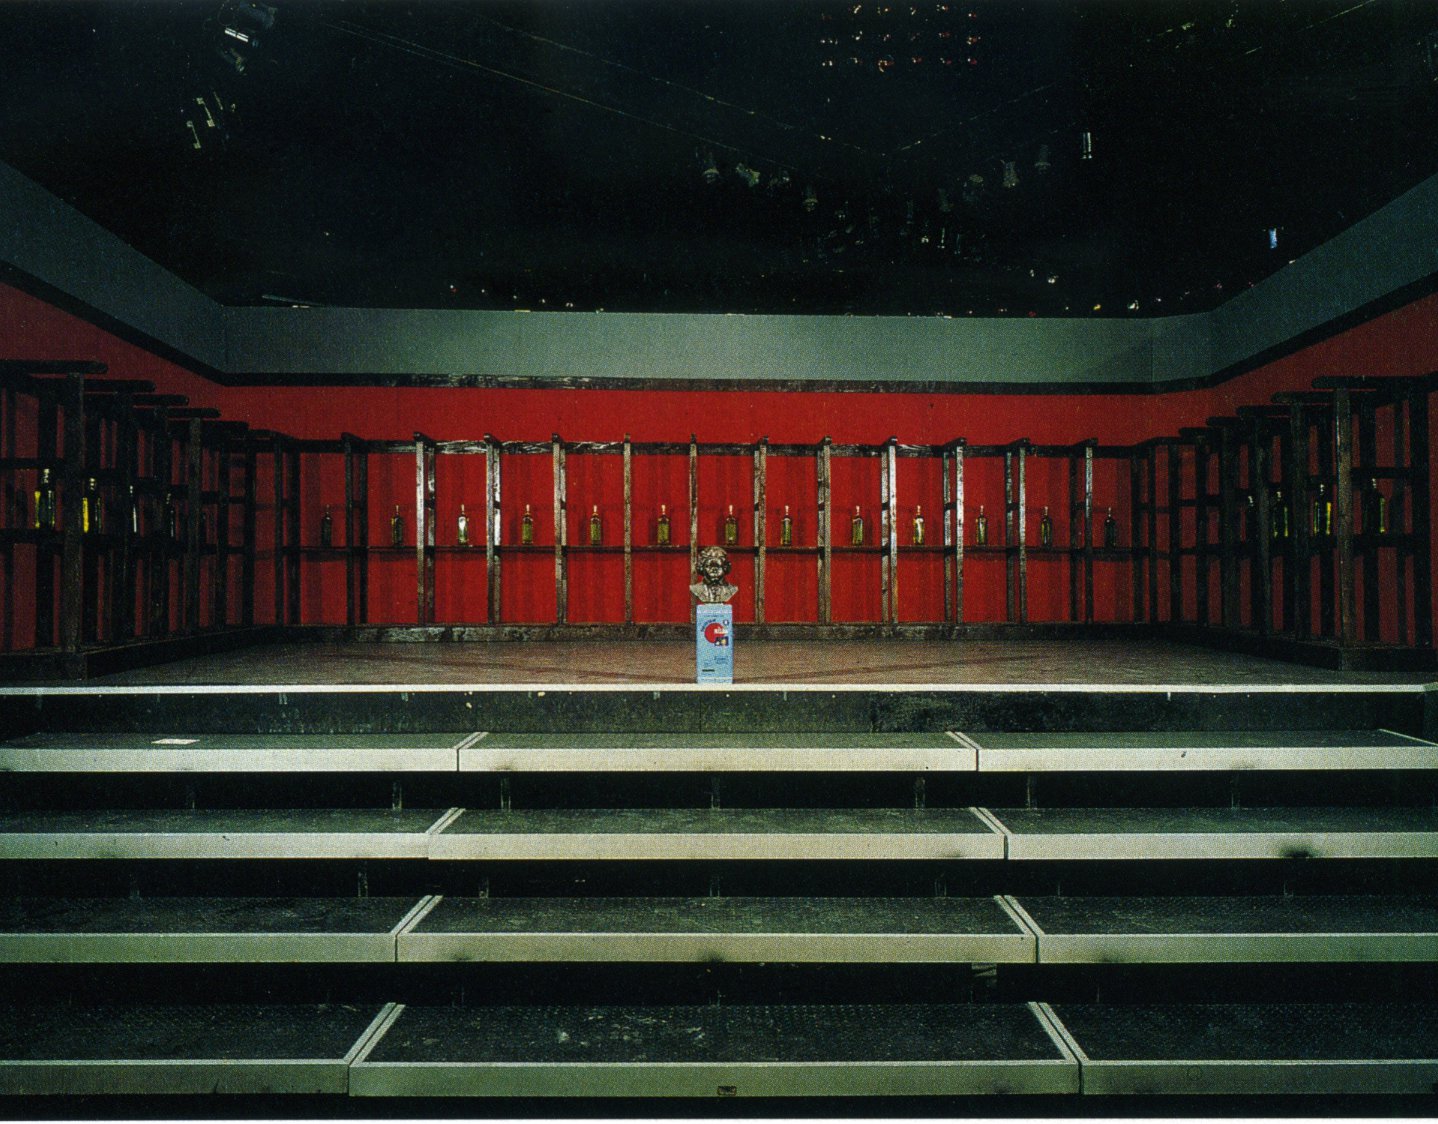 Thanasis Totsikas, Untitled, metal, red blankets, oil, wooden pews, 700 x 500 x 220 cm (275 5/8 x 196 7/8 x 86 5/8 in), 1988. Installation view, Hyper-product, Club 22, Athens, 1988